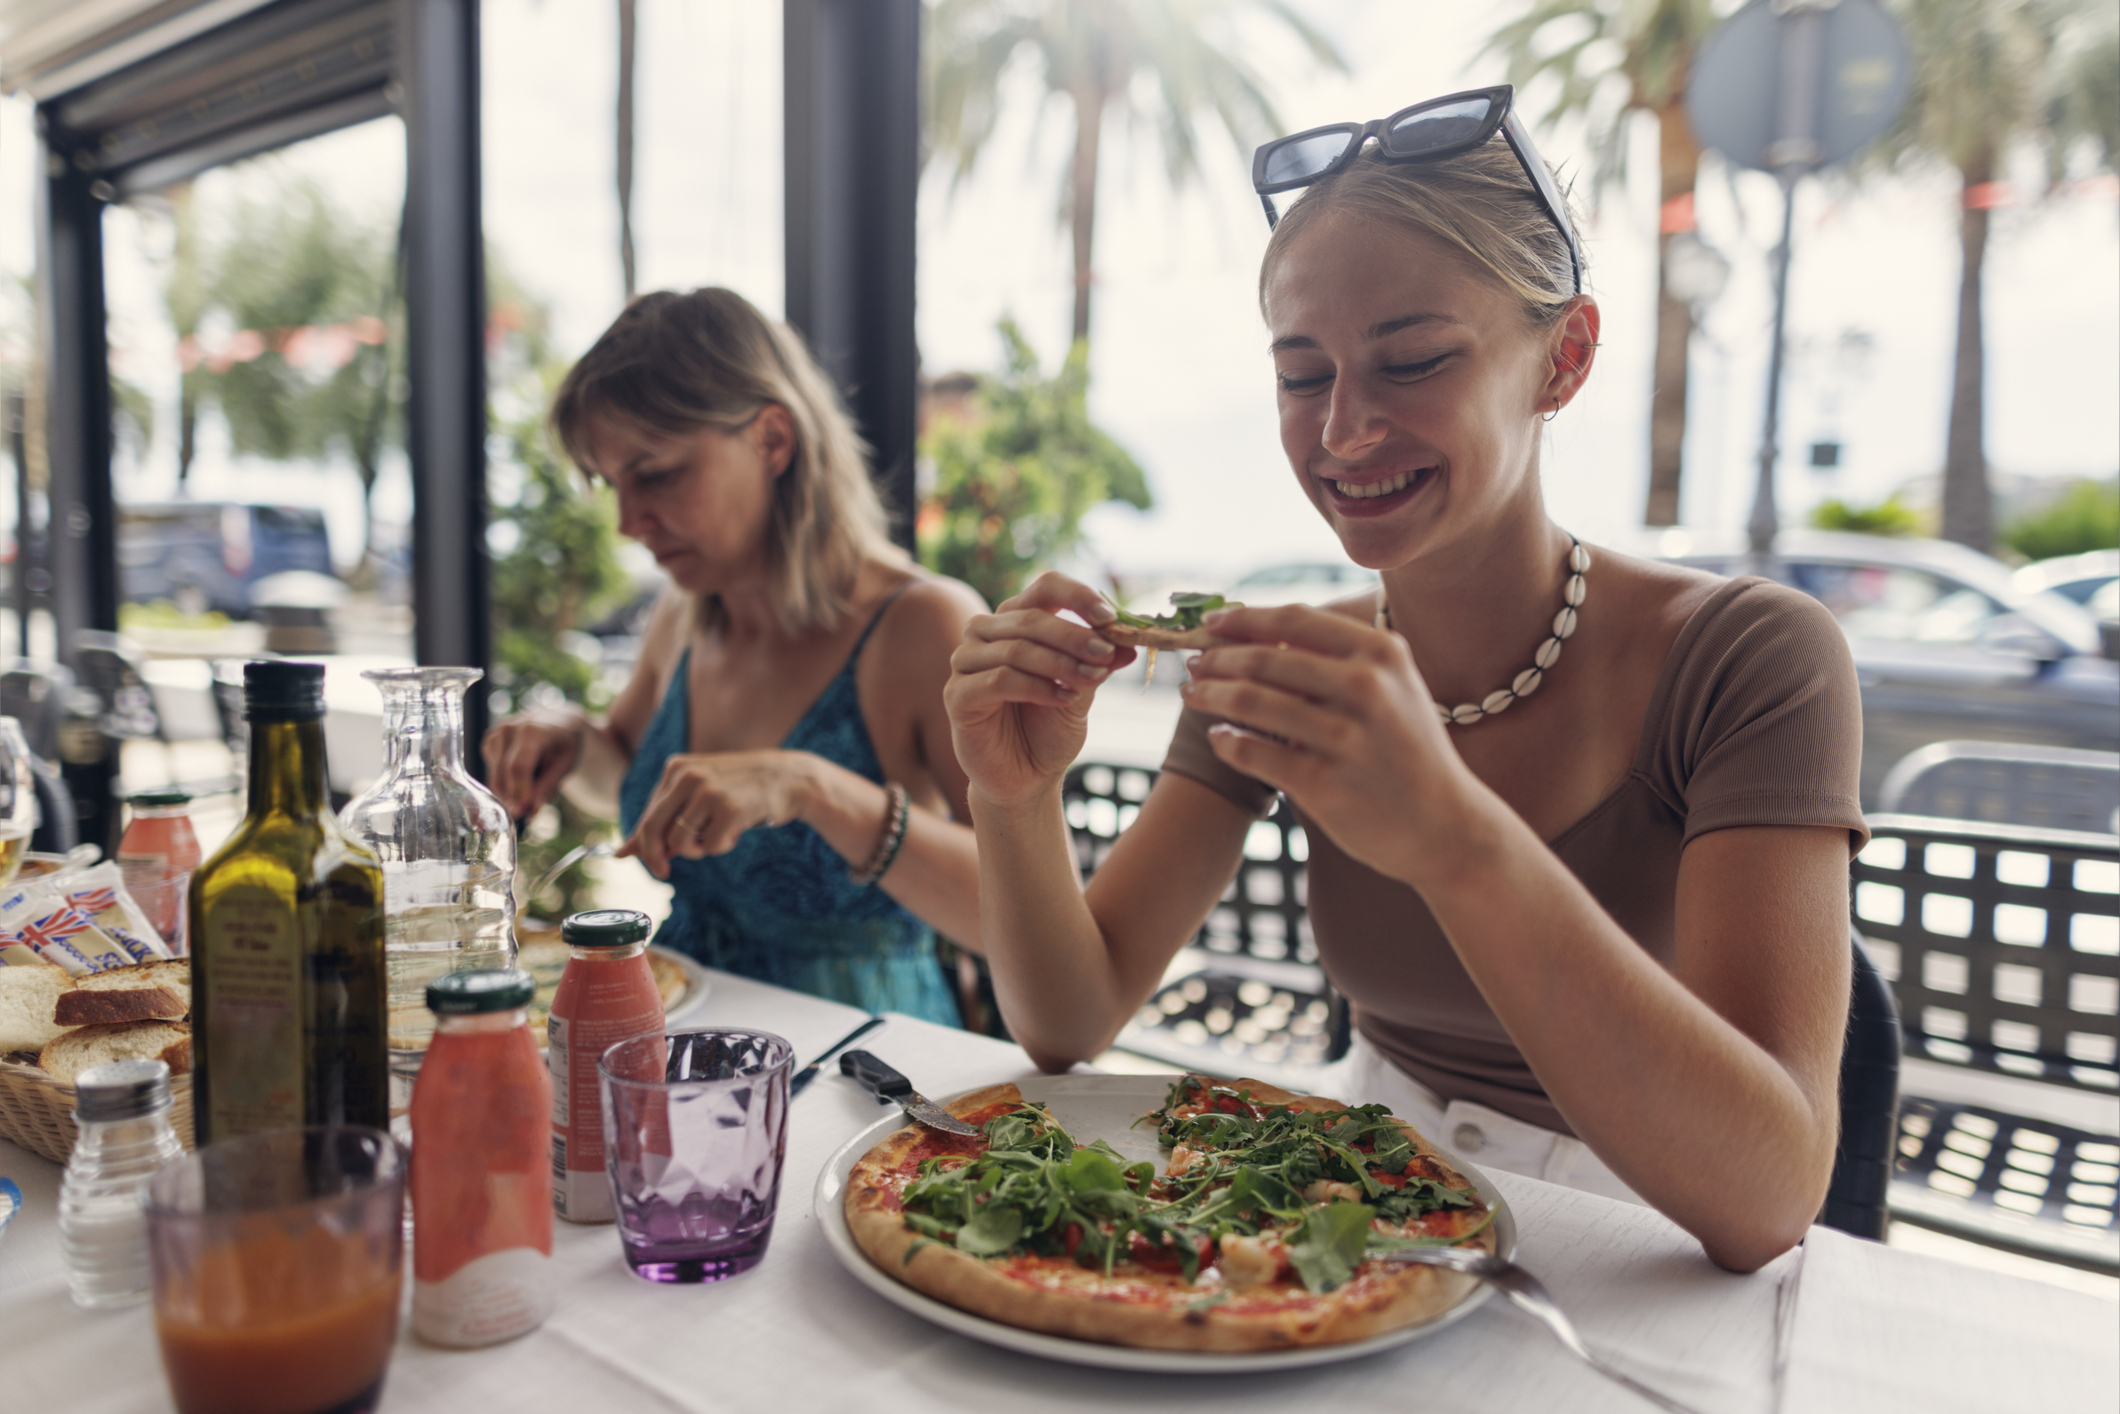 Woman enjoying a pizza at an outdoor restaurant with another person in the background